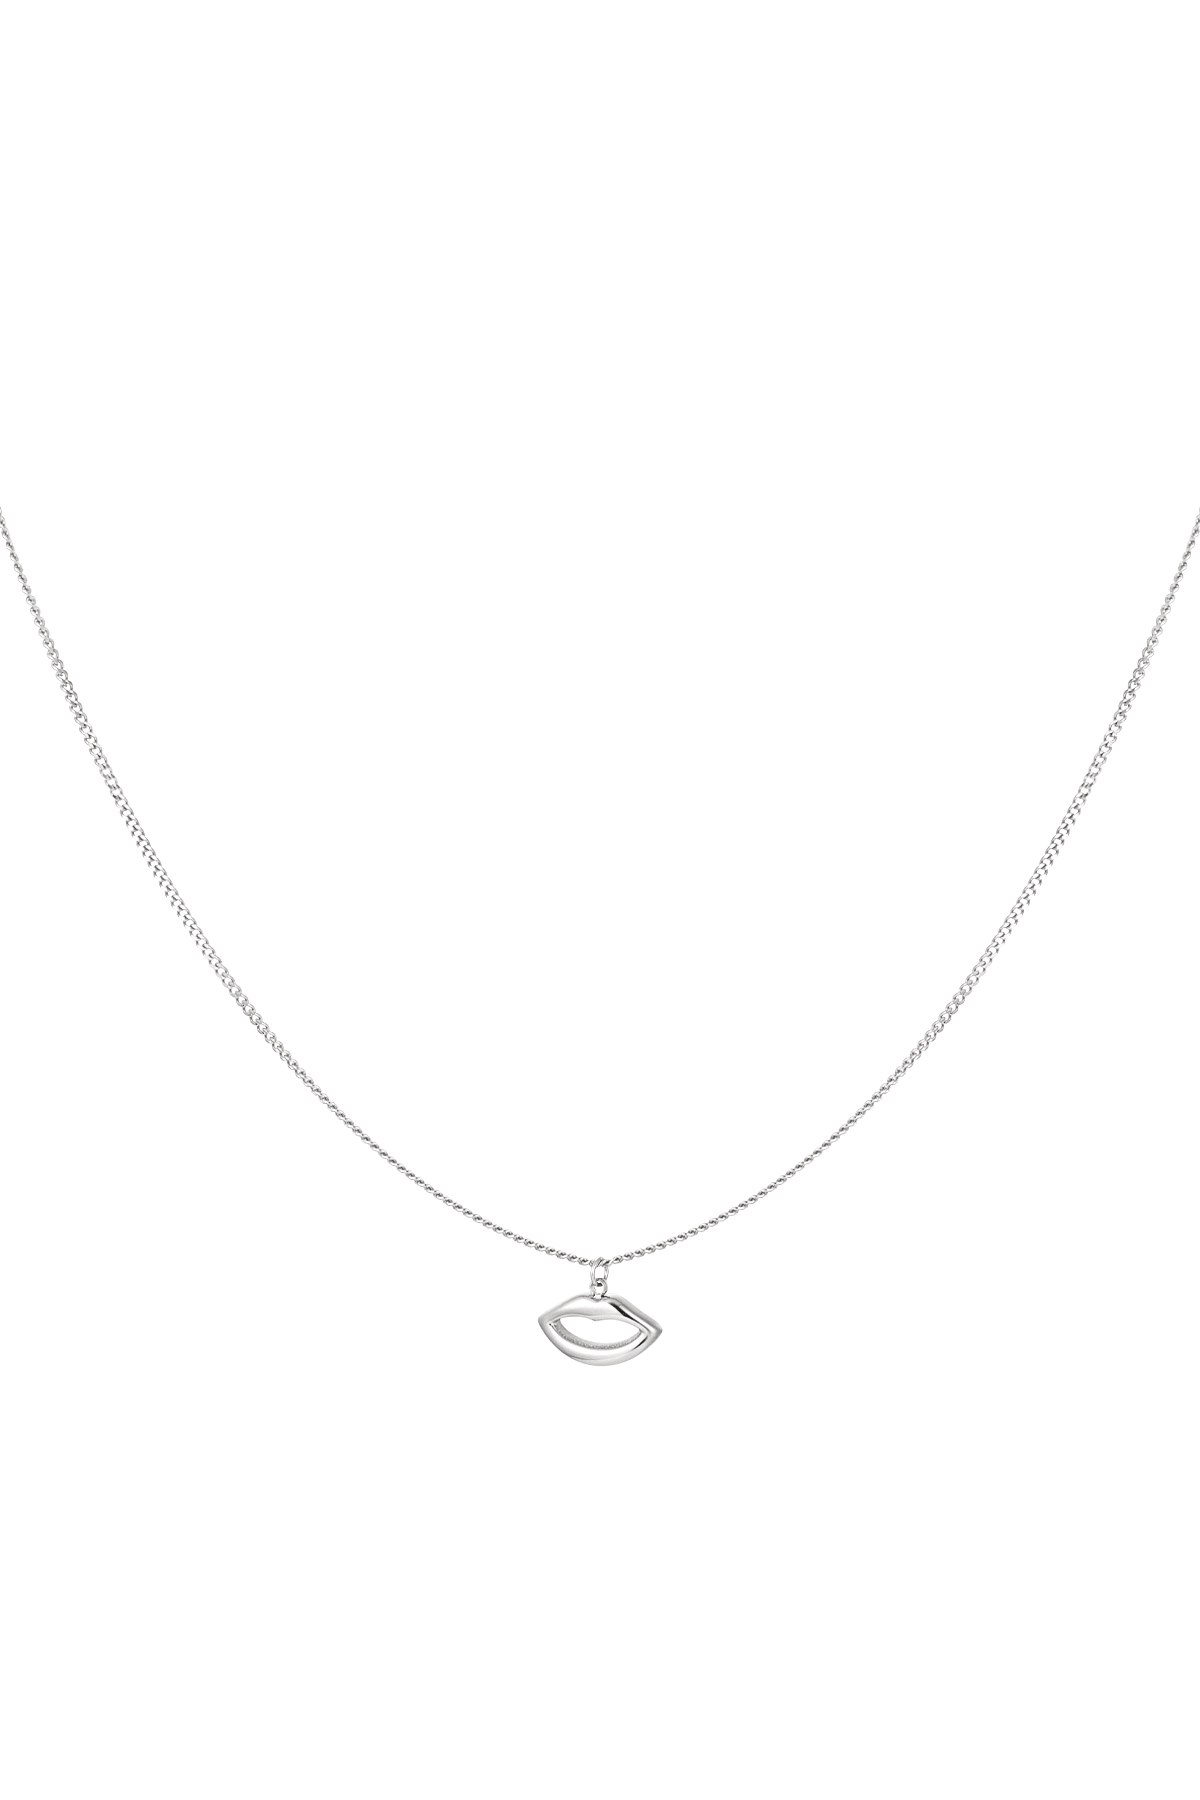 Simple necklace with lips charm - silver h5 